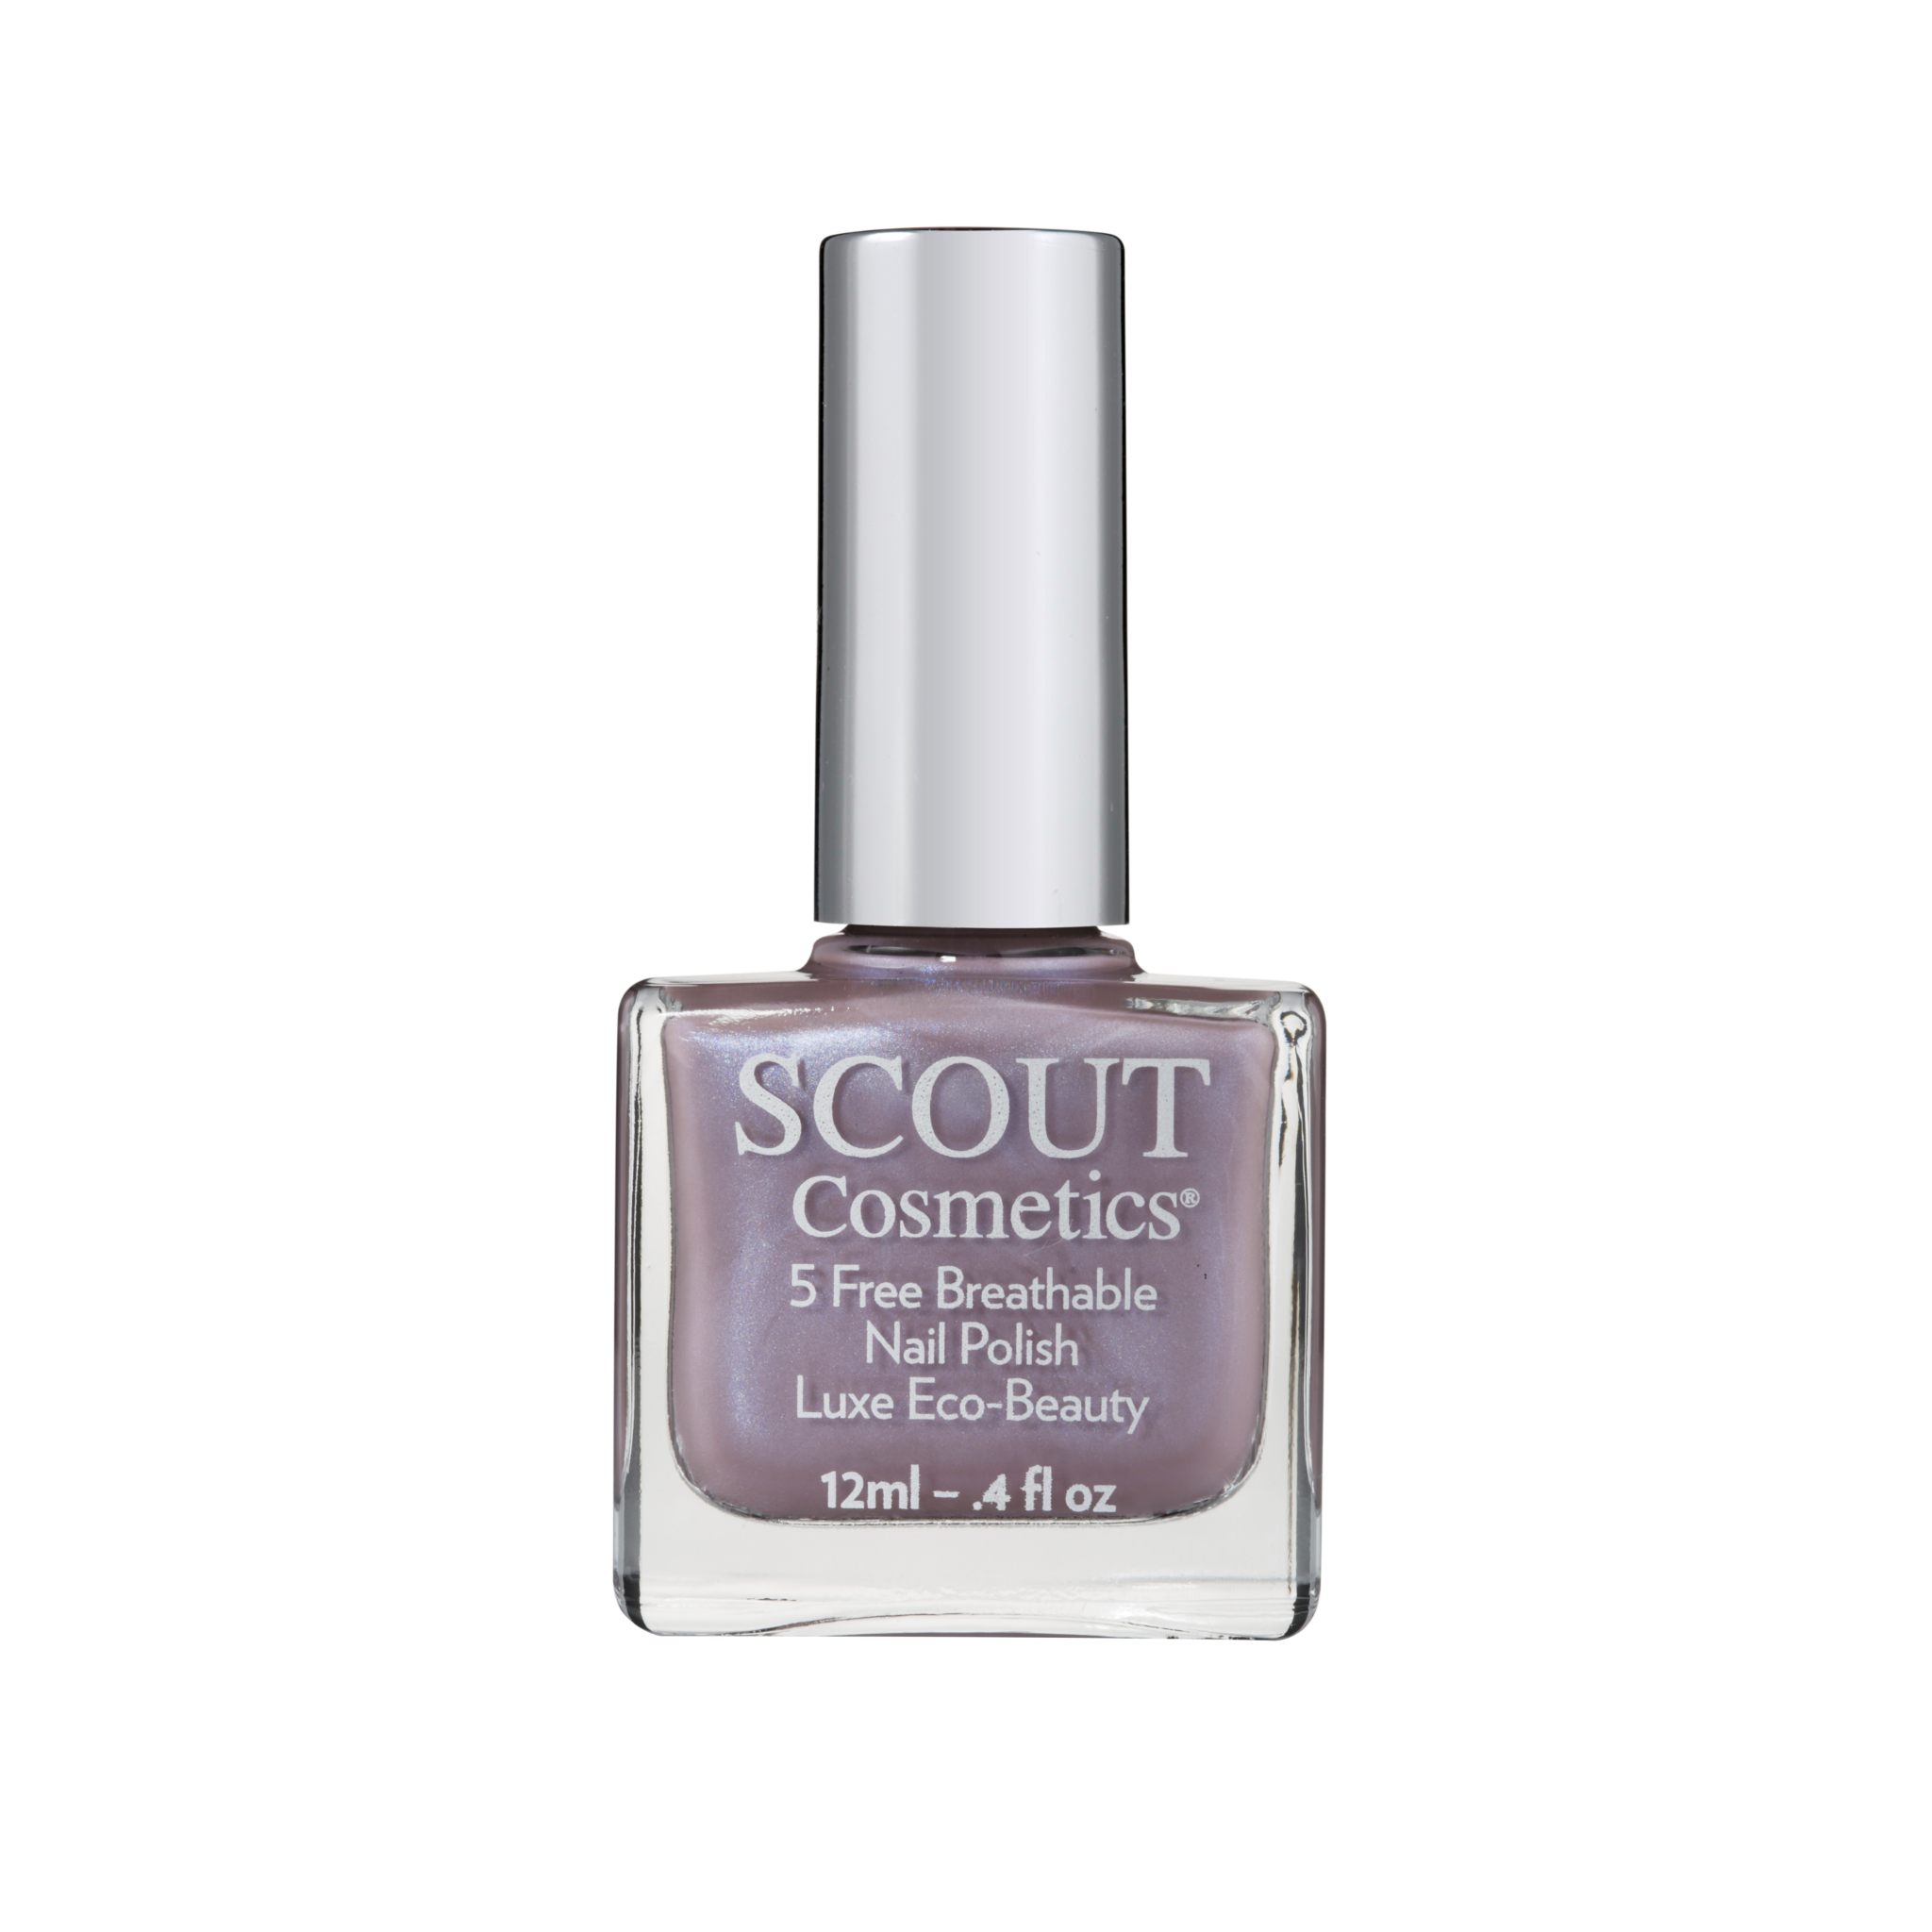 SCOUT Cosmetics Nail Polish - Head Over Heels